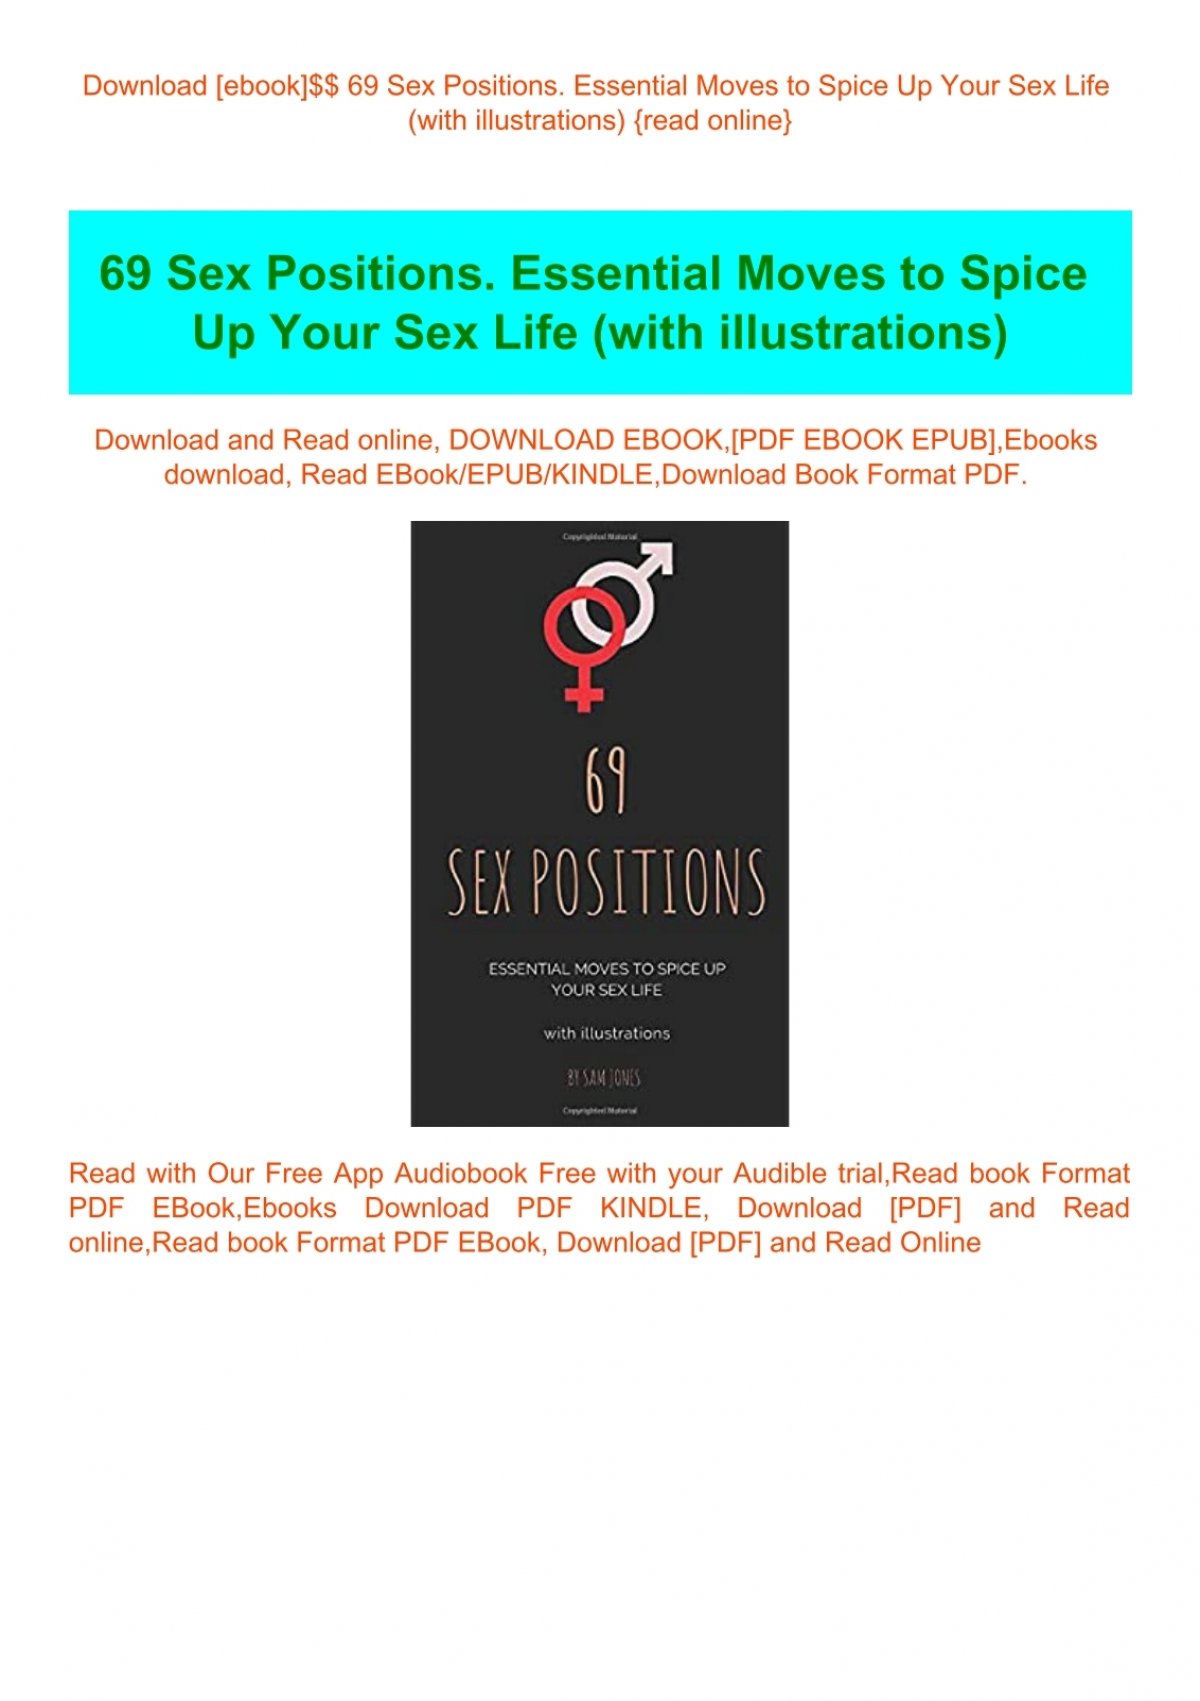 Download [ebook] 69 Sex Positions Essential Moves To Spice Up Your